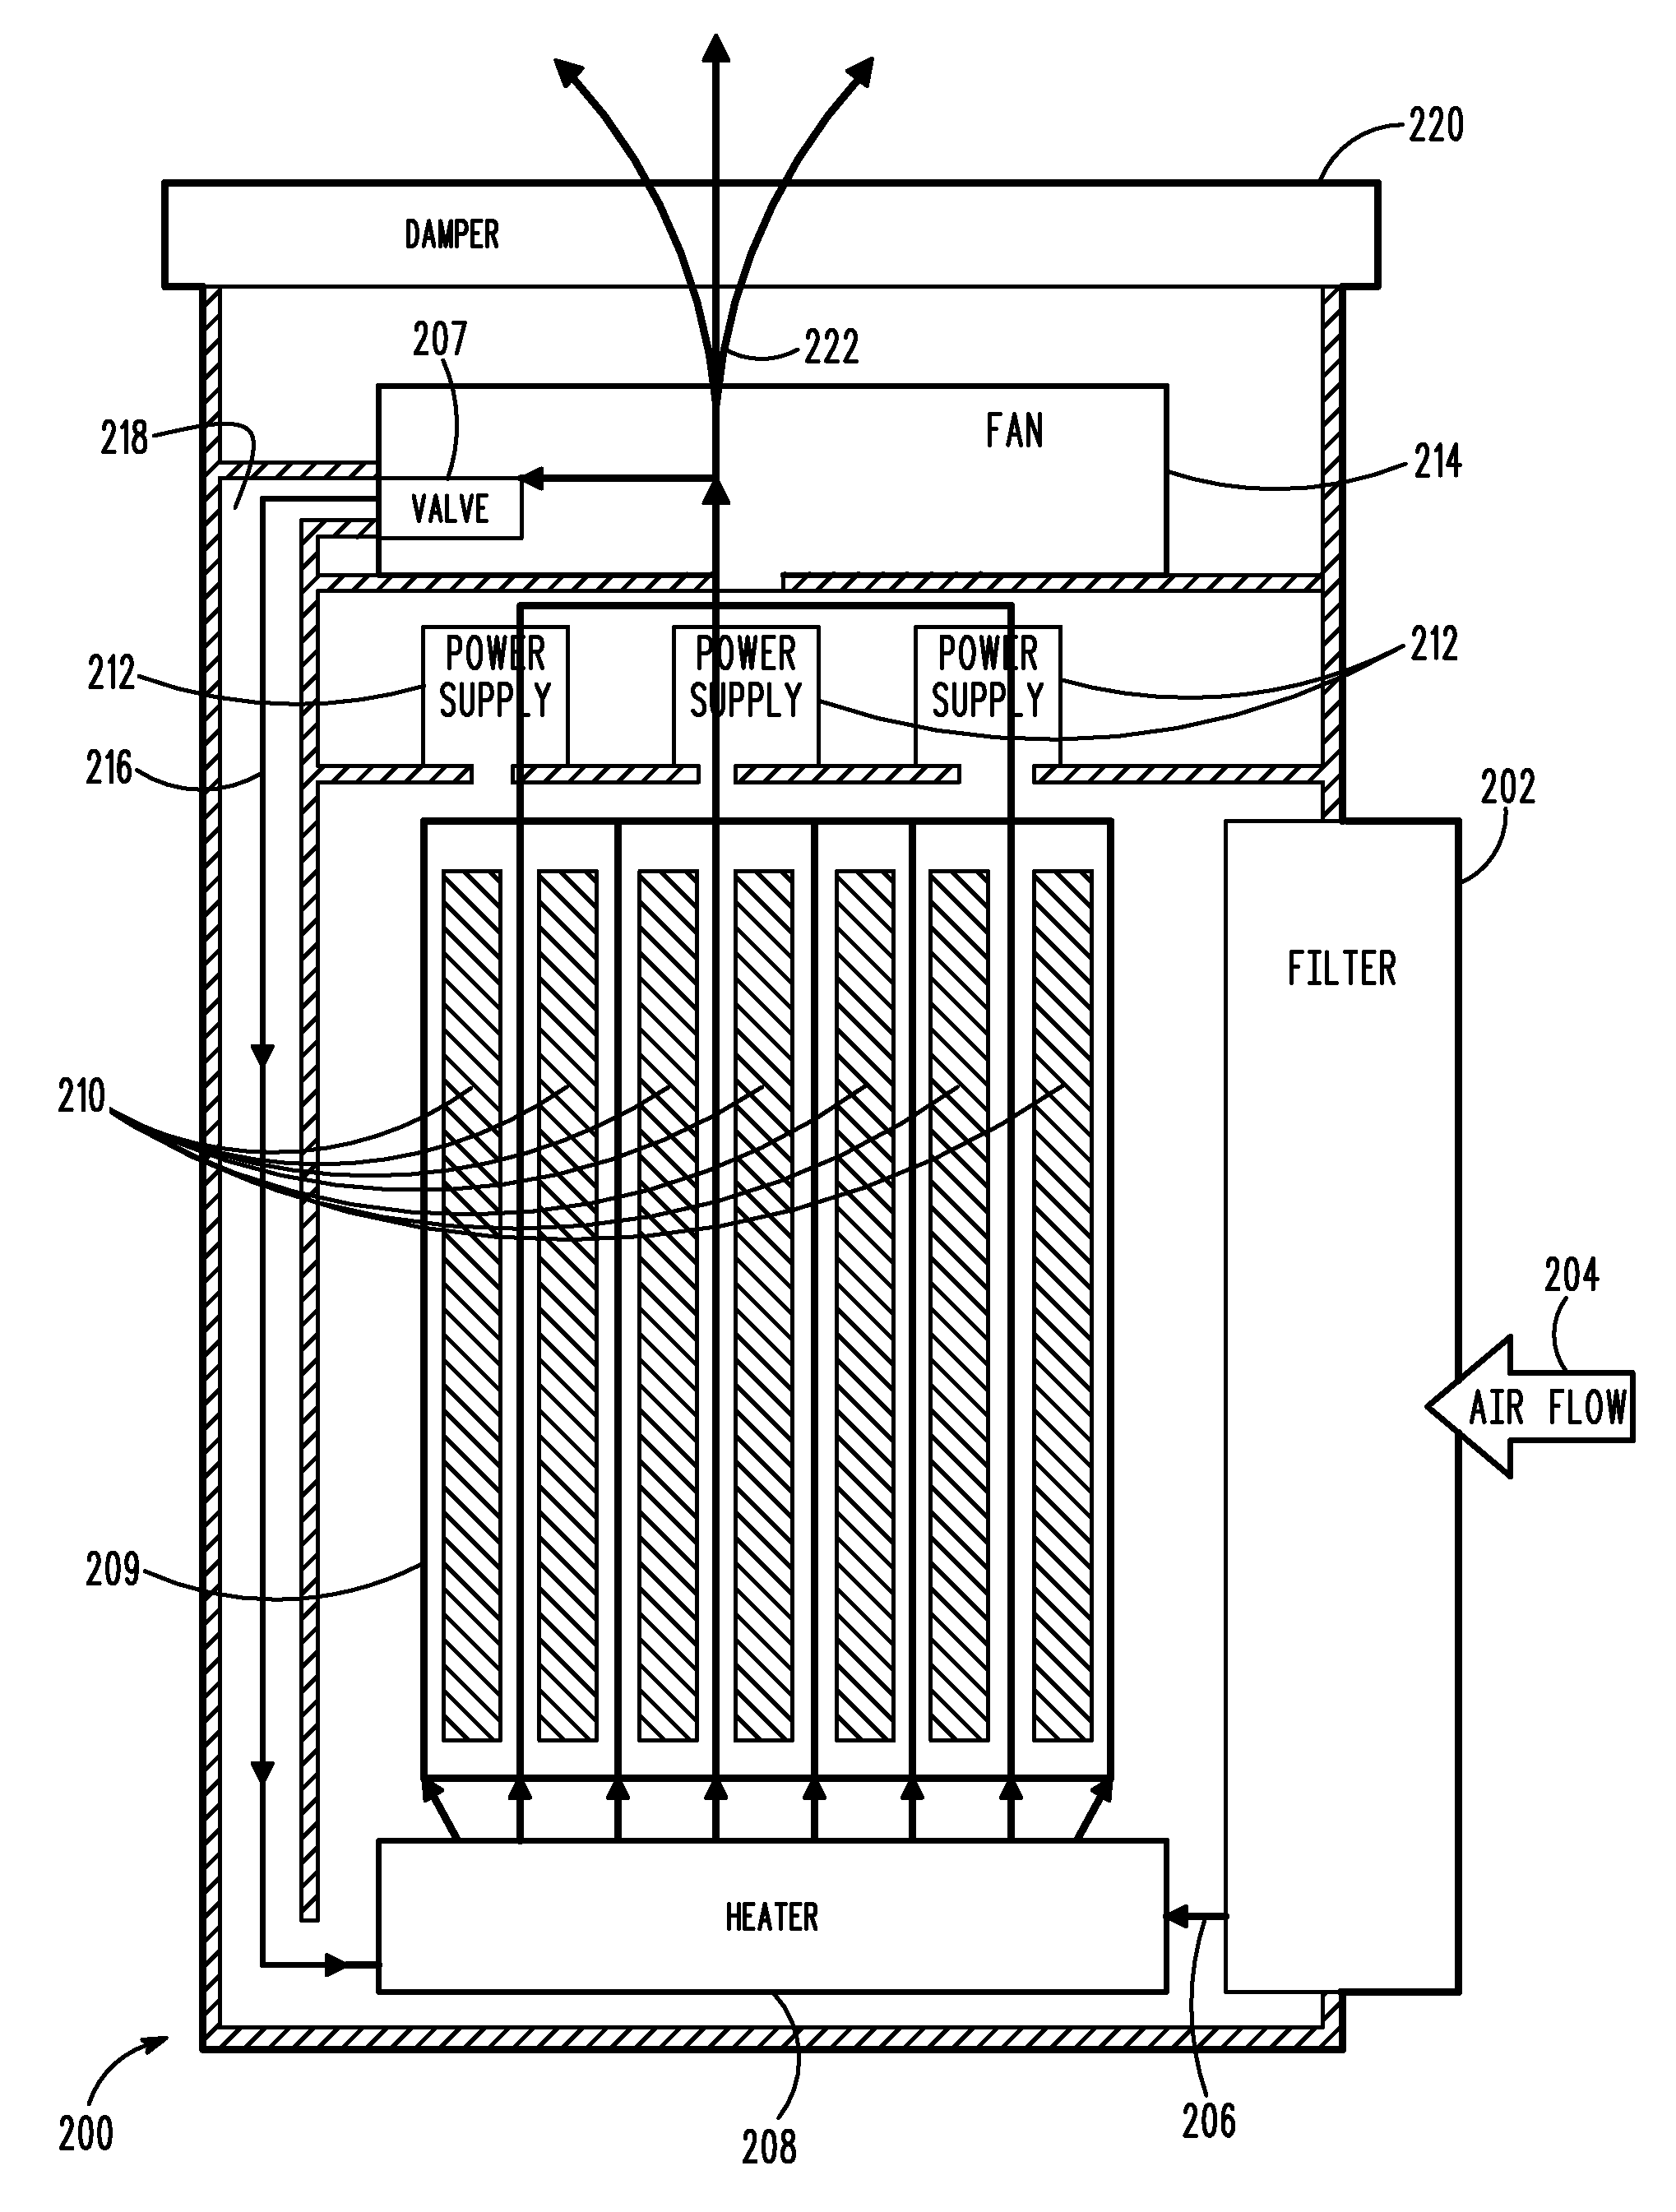 System and method for environmental control of an enclosure